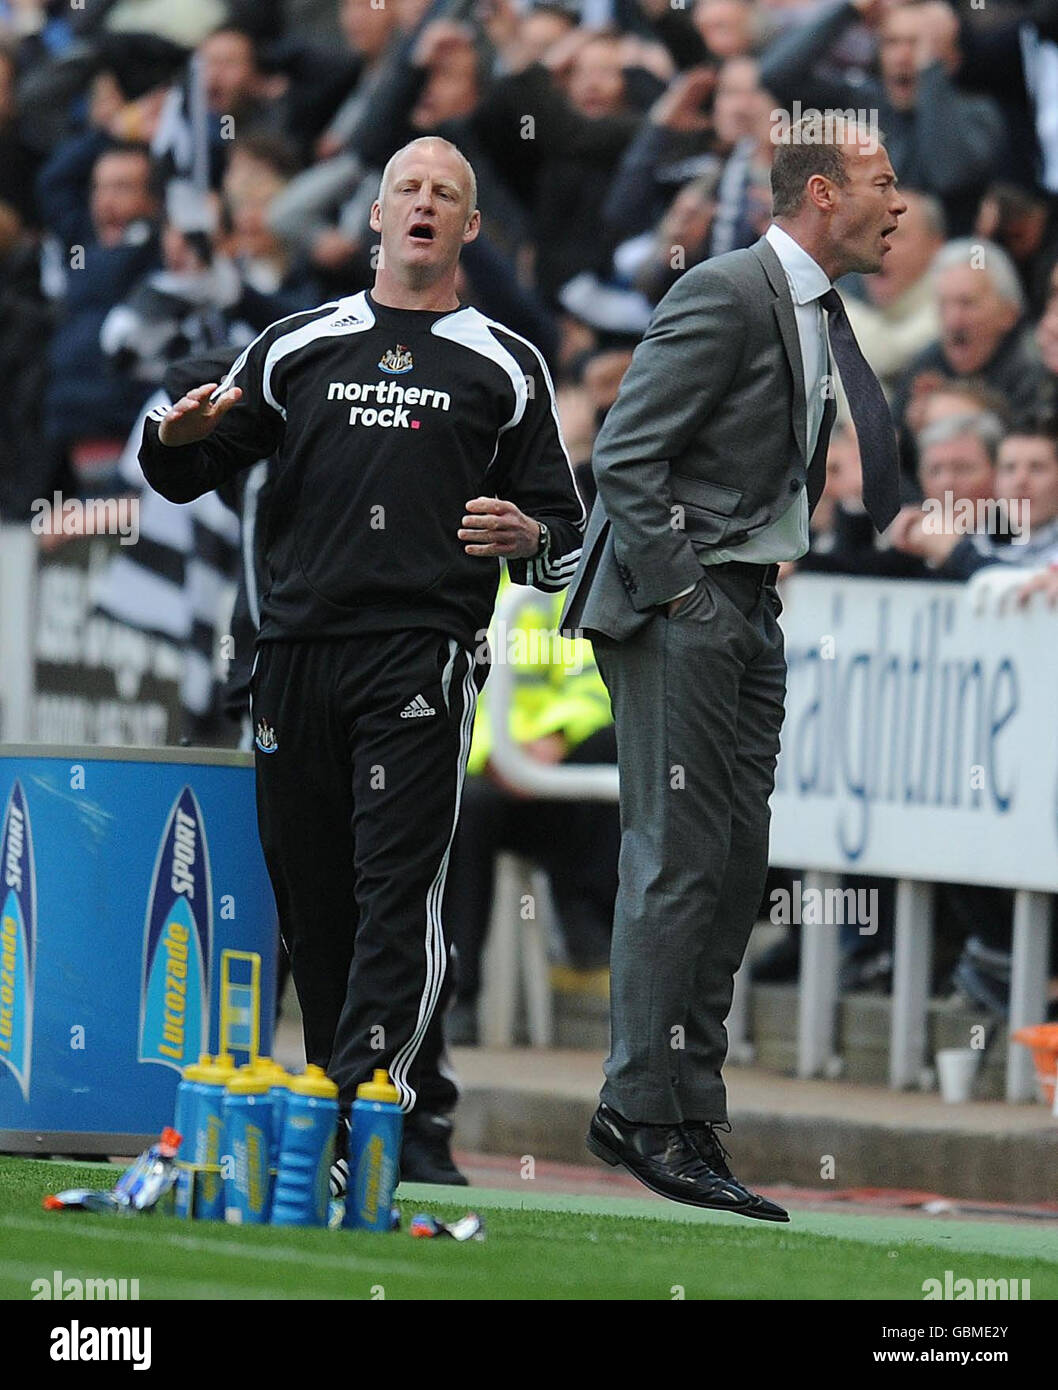 Soccer - Barclays Premier League - Newcastle United v Middlesbrough - St James' Park. Newcastle manager Alan Shearer (right) and Assistant Ian Dowie react during the Barclays Premier League match at St James' Park, Newcastle. Stock Photo